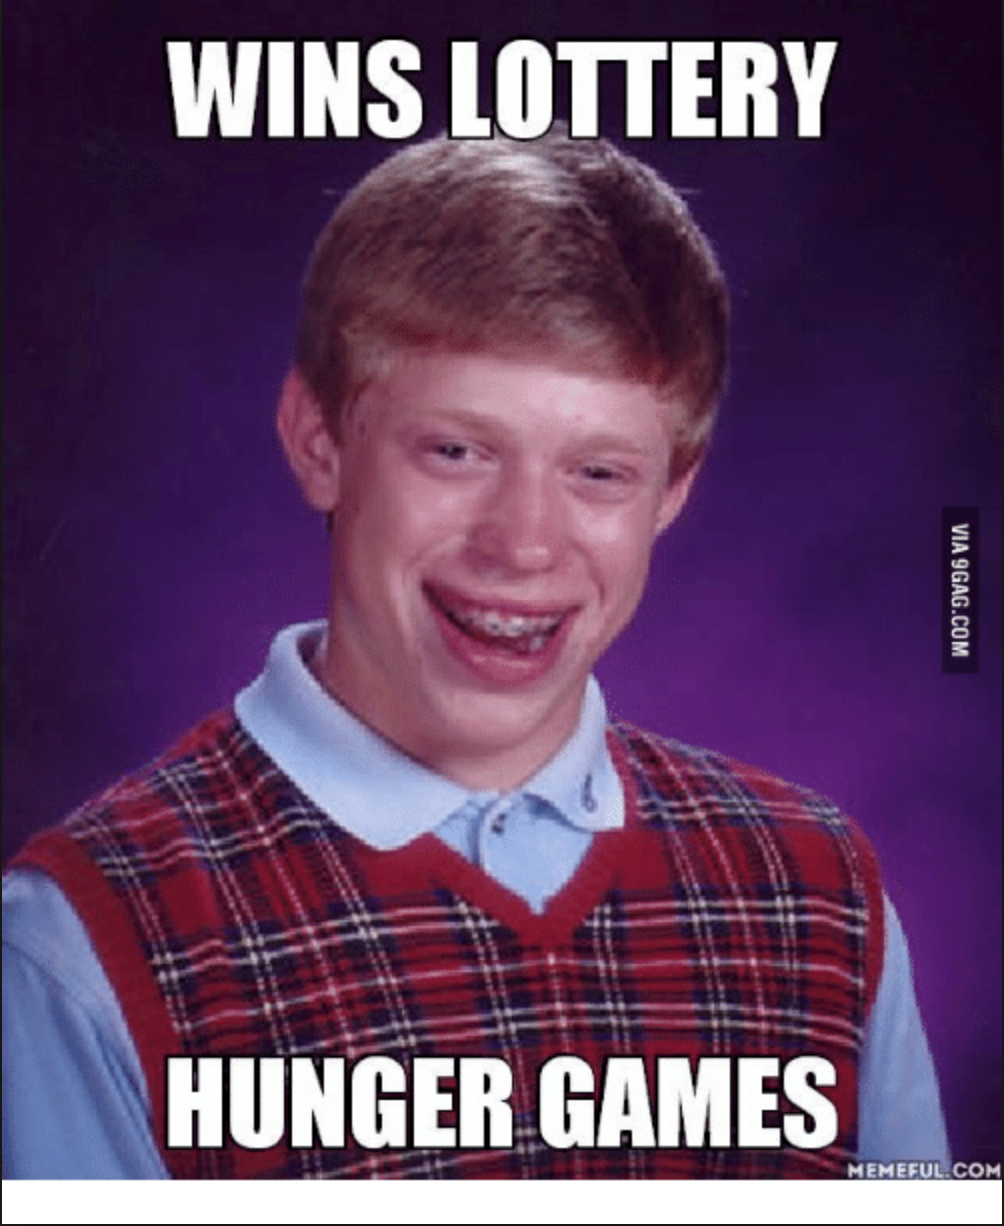 Hunger Games Memes - Bad Luck Brian Wins the Lottery